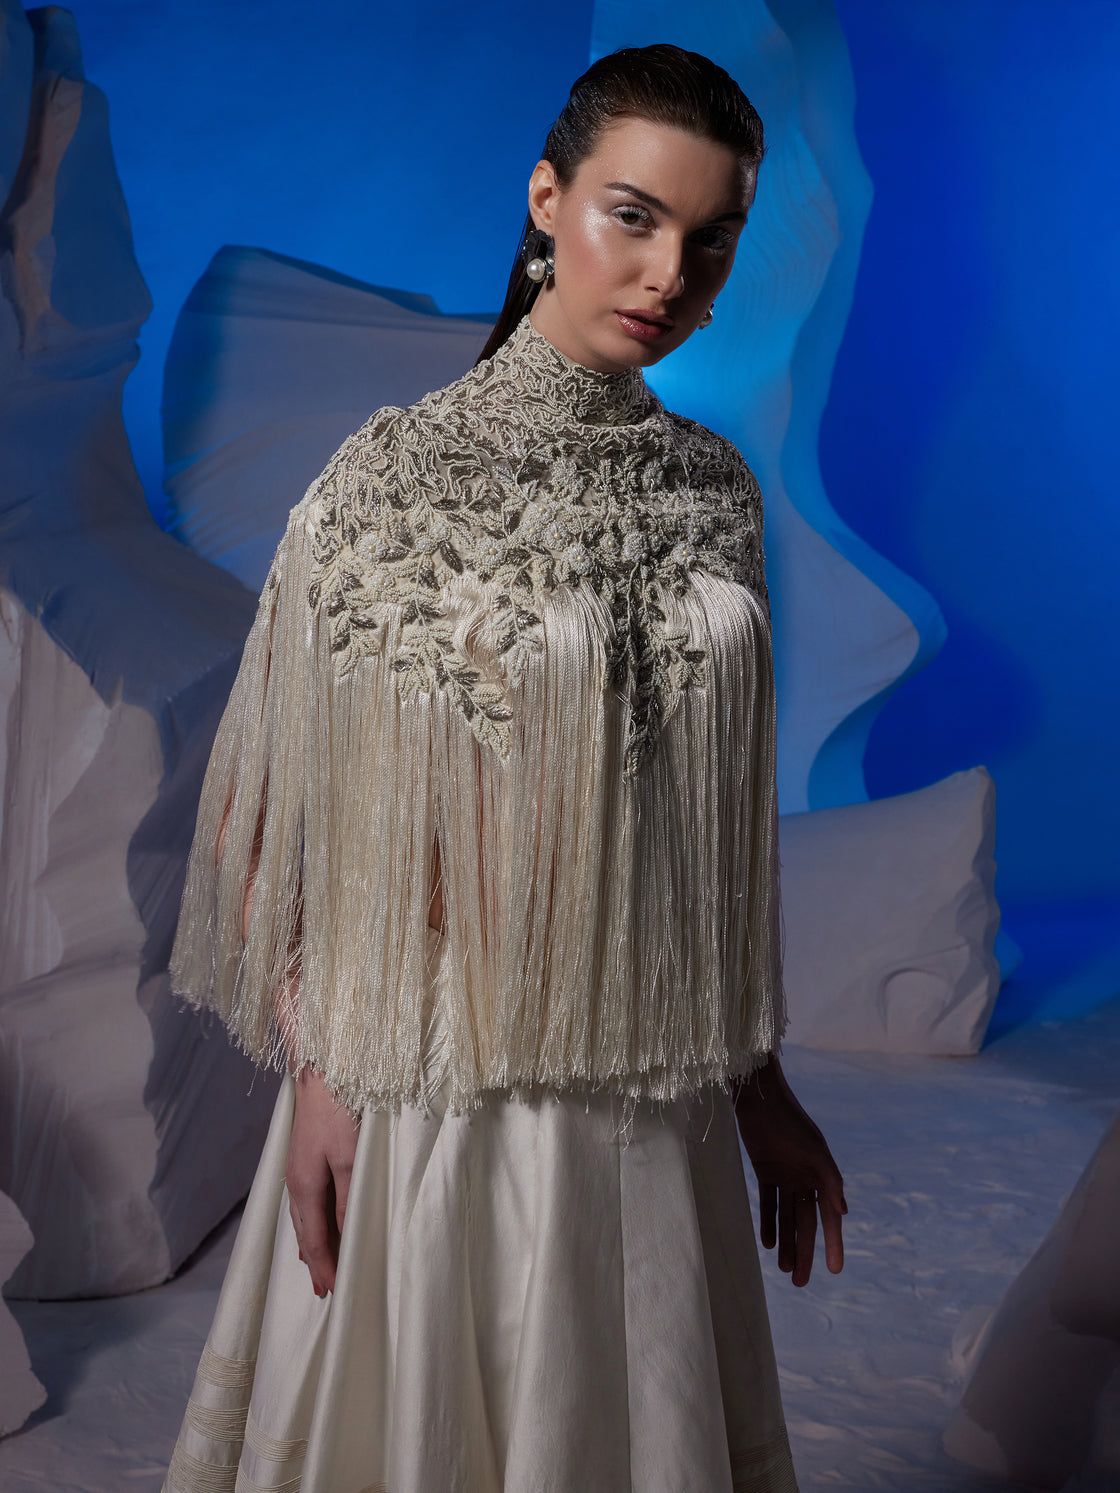 Chic ivory top adorned by silver and pearl embroidery